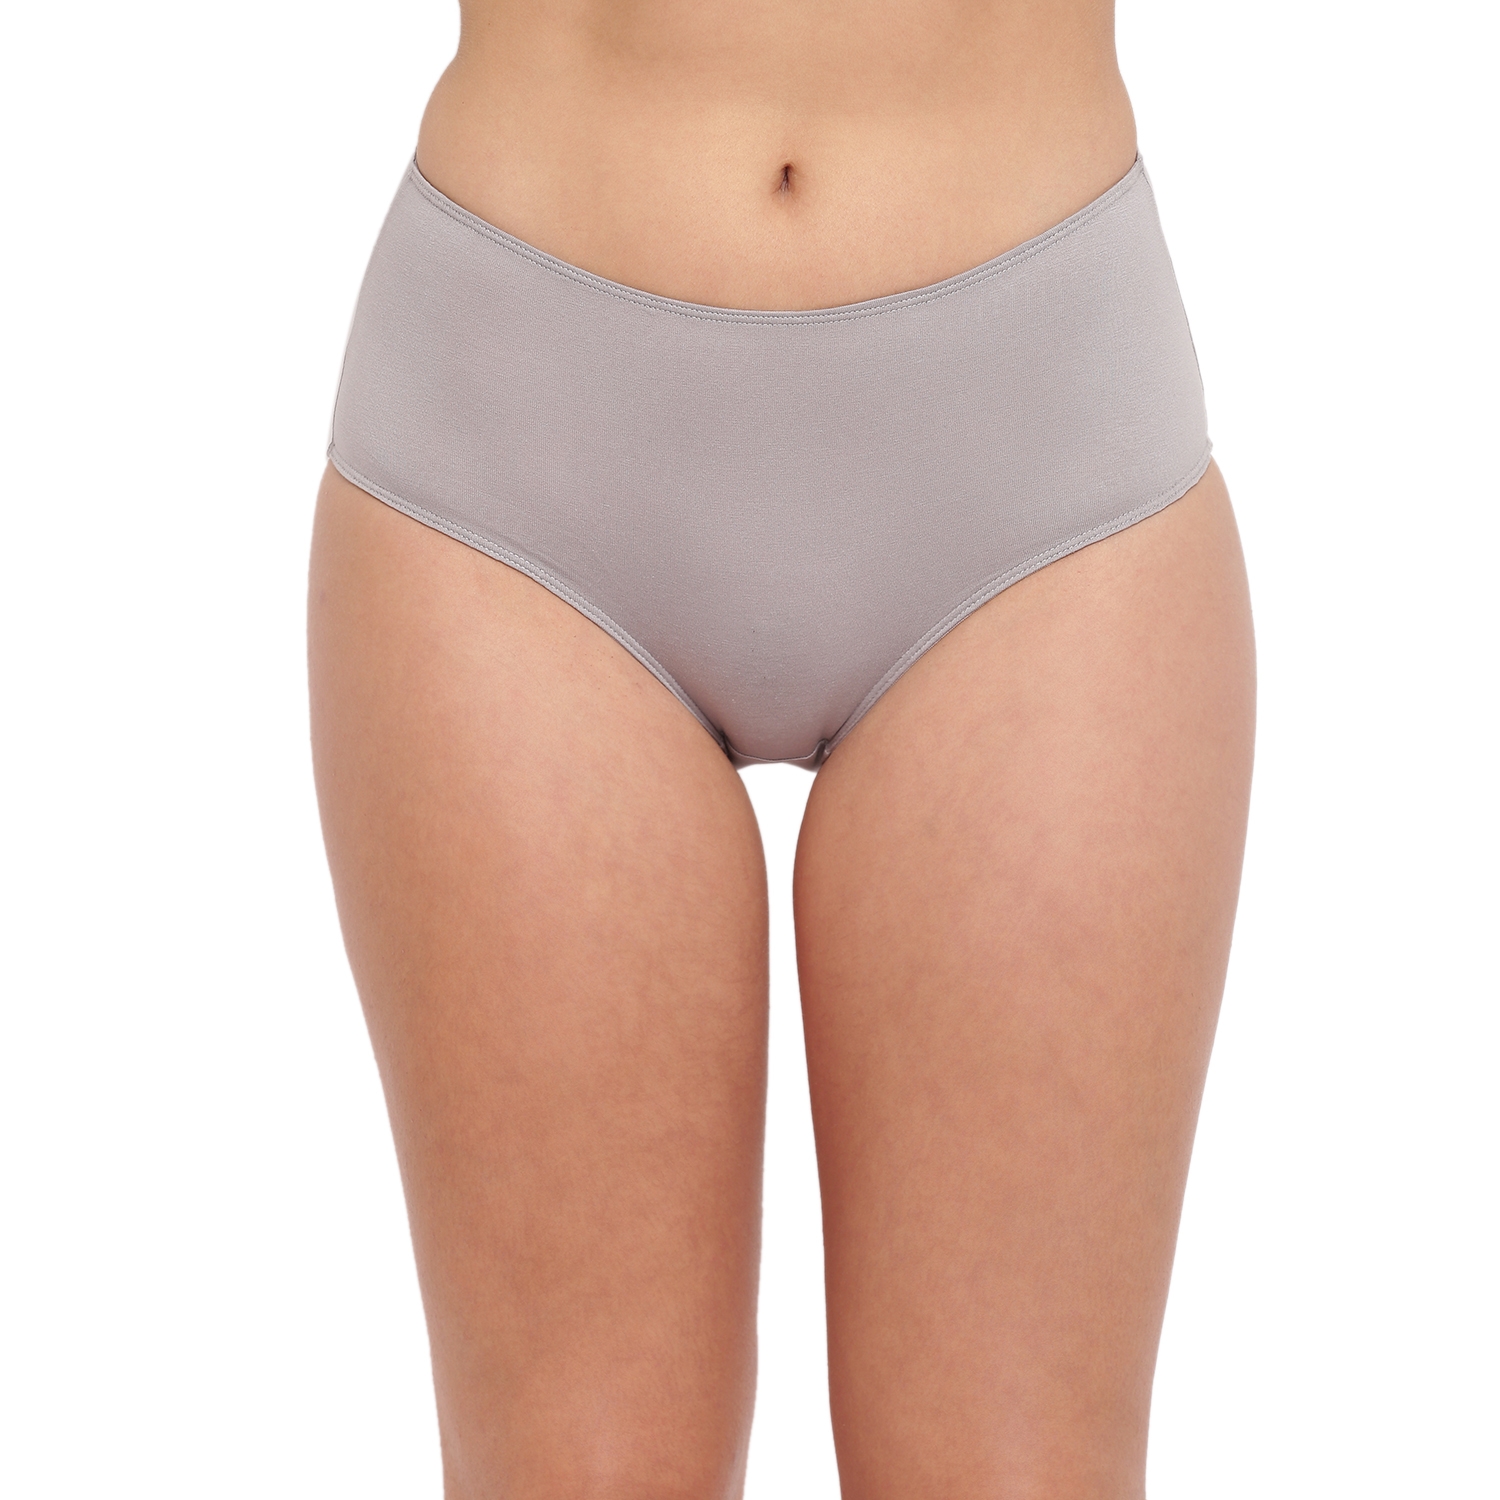 BASIICS by La Intimo | Grey Tease 2 Please Hipster Panty